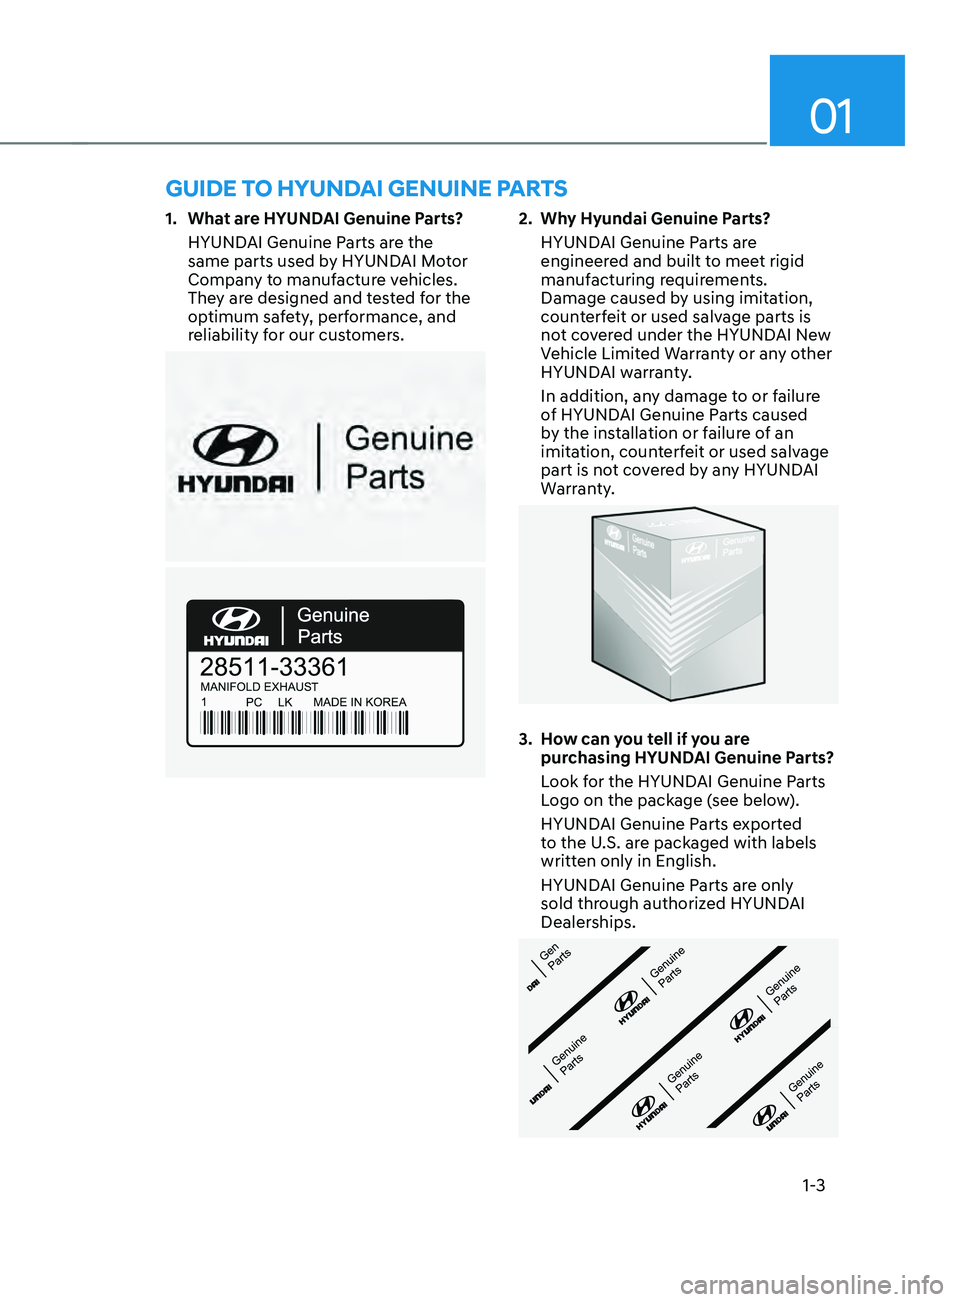 HYUNDAI SANTA FE 2021  Owners Manual 01
1-3
GUIDE TO HYUNDAI GENUINE PARTS
1. What are HYUNDAI Genuine Parts?
HYUND
AI Genuine Parts are the 
same parts used by HYUNDAI Motor 
Company to manufacture vehicles. 
They are designed and teste